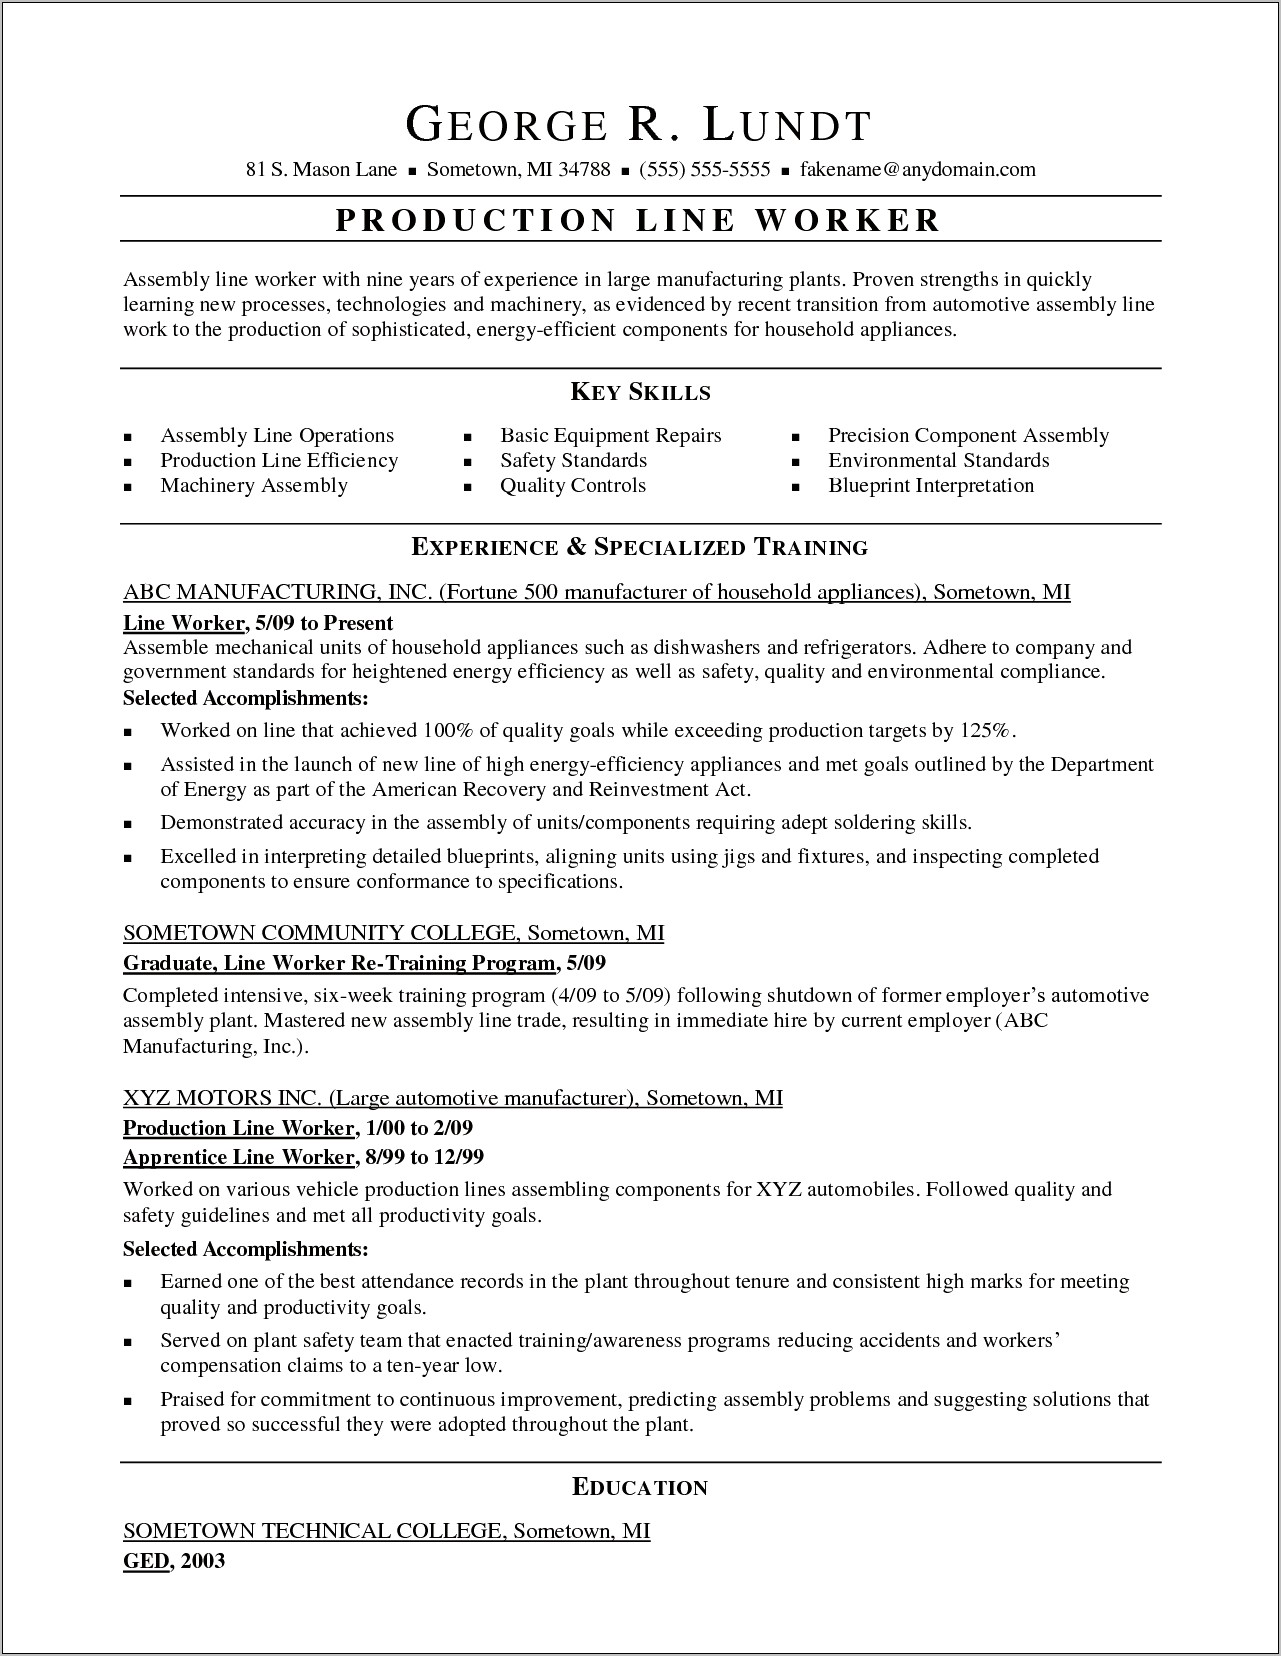 Resume Objective Statements For Factory Work